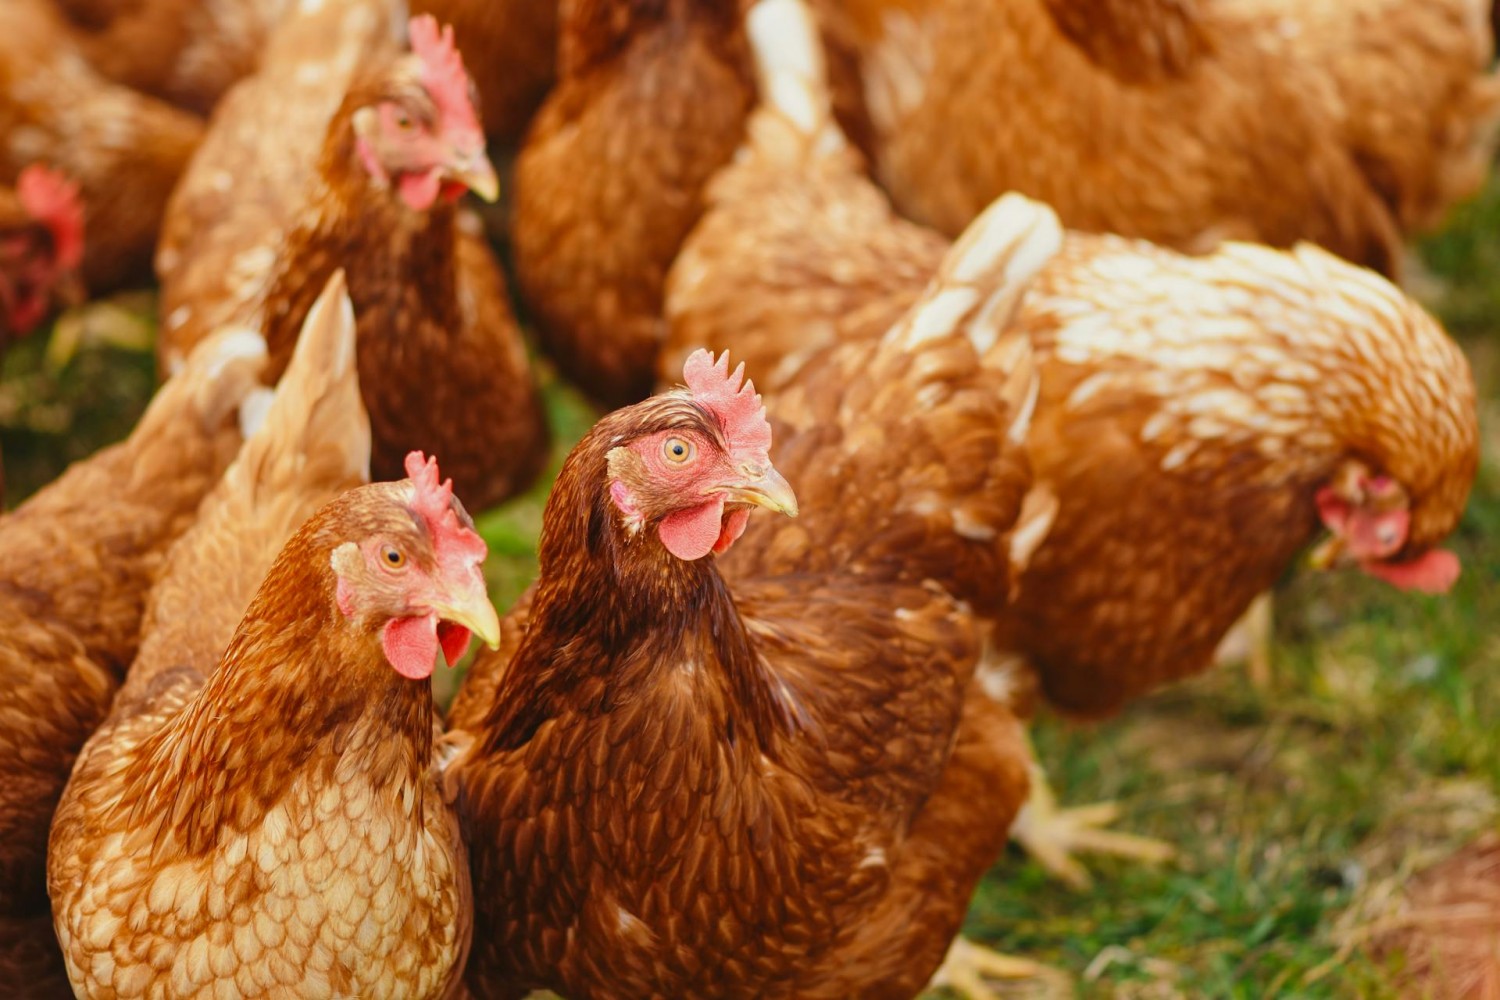 South African Poultry Industry Vows to Cooperate with Competition Commission